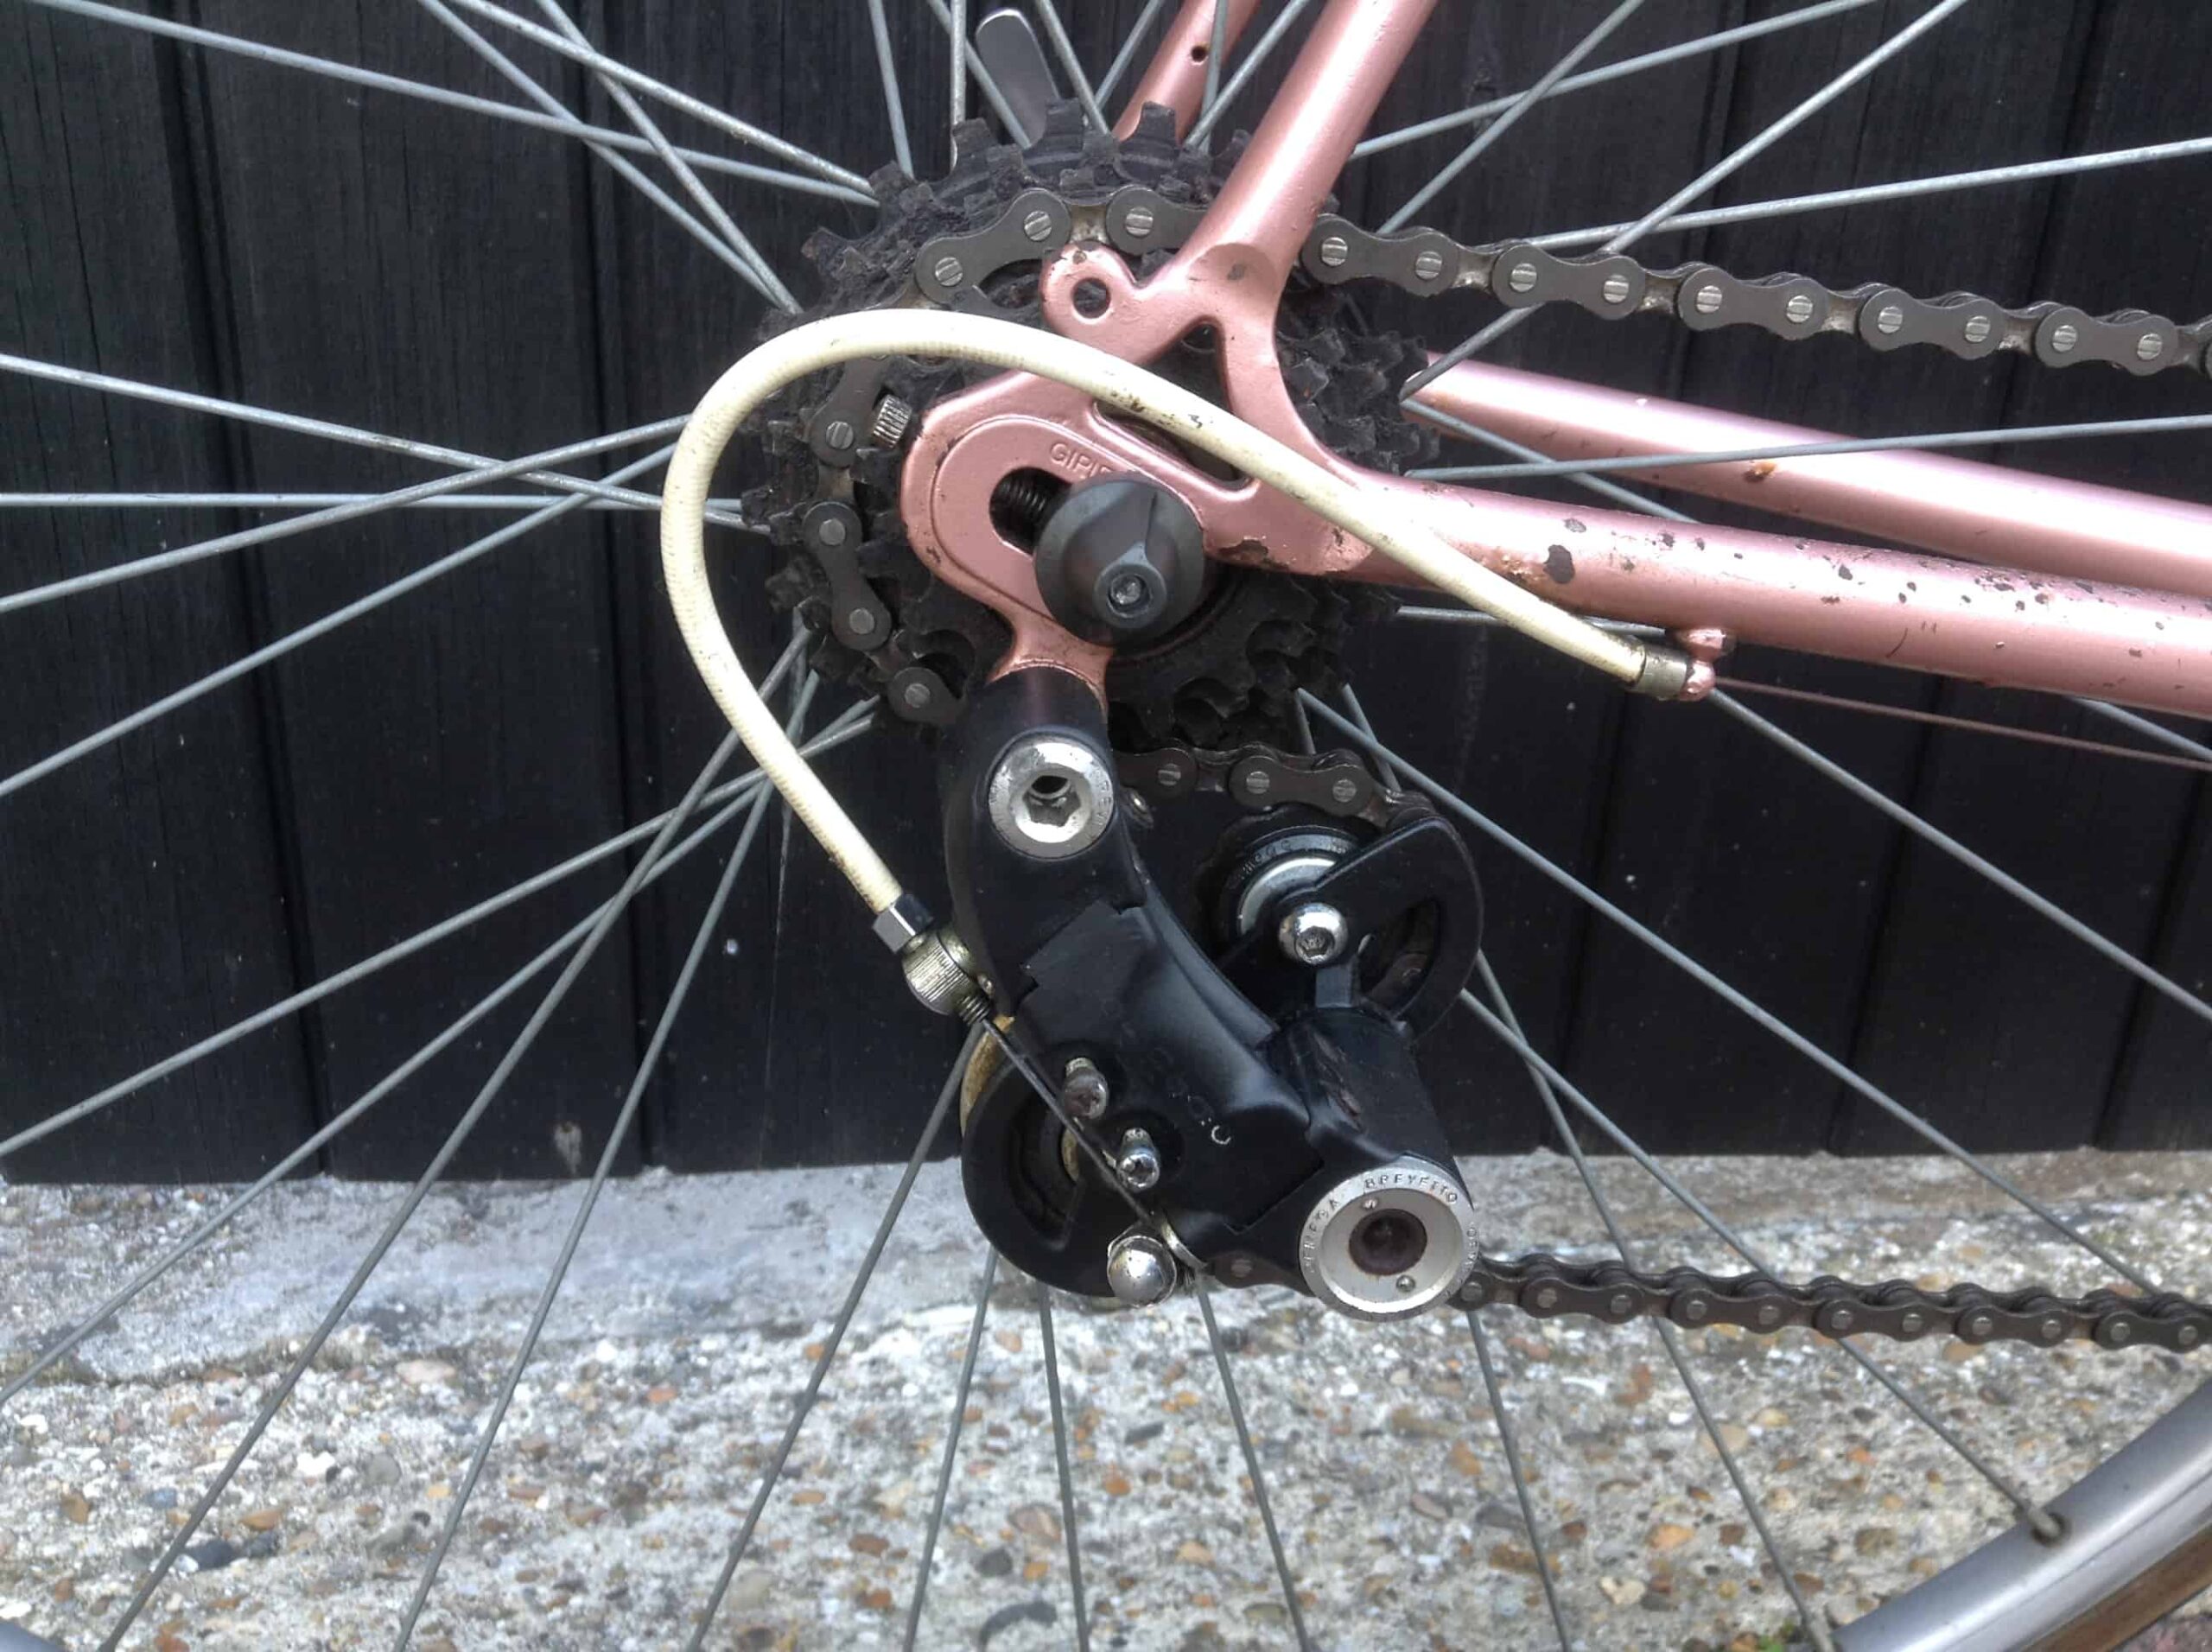 Image of cleaned Ofmega rear derailleur